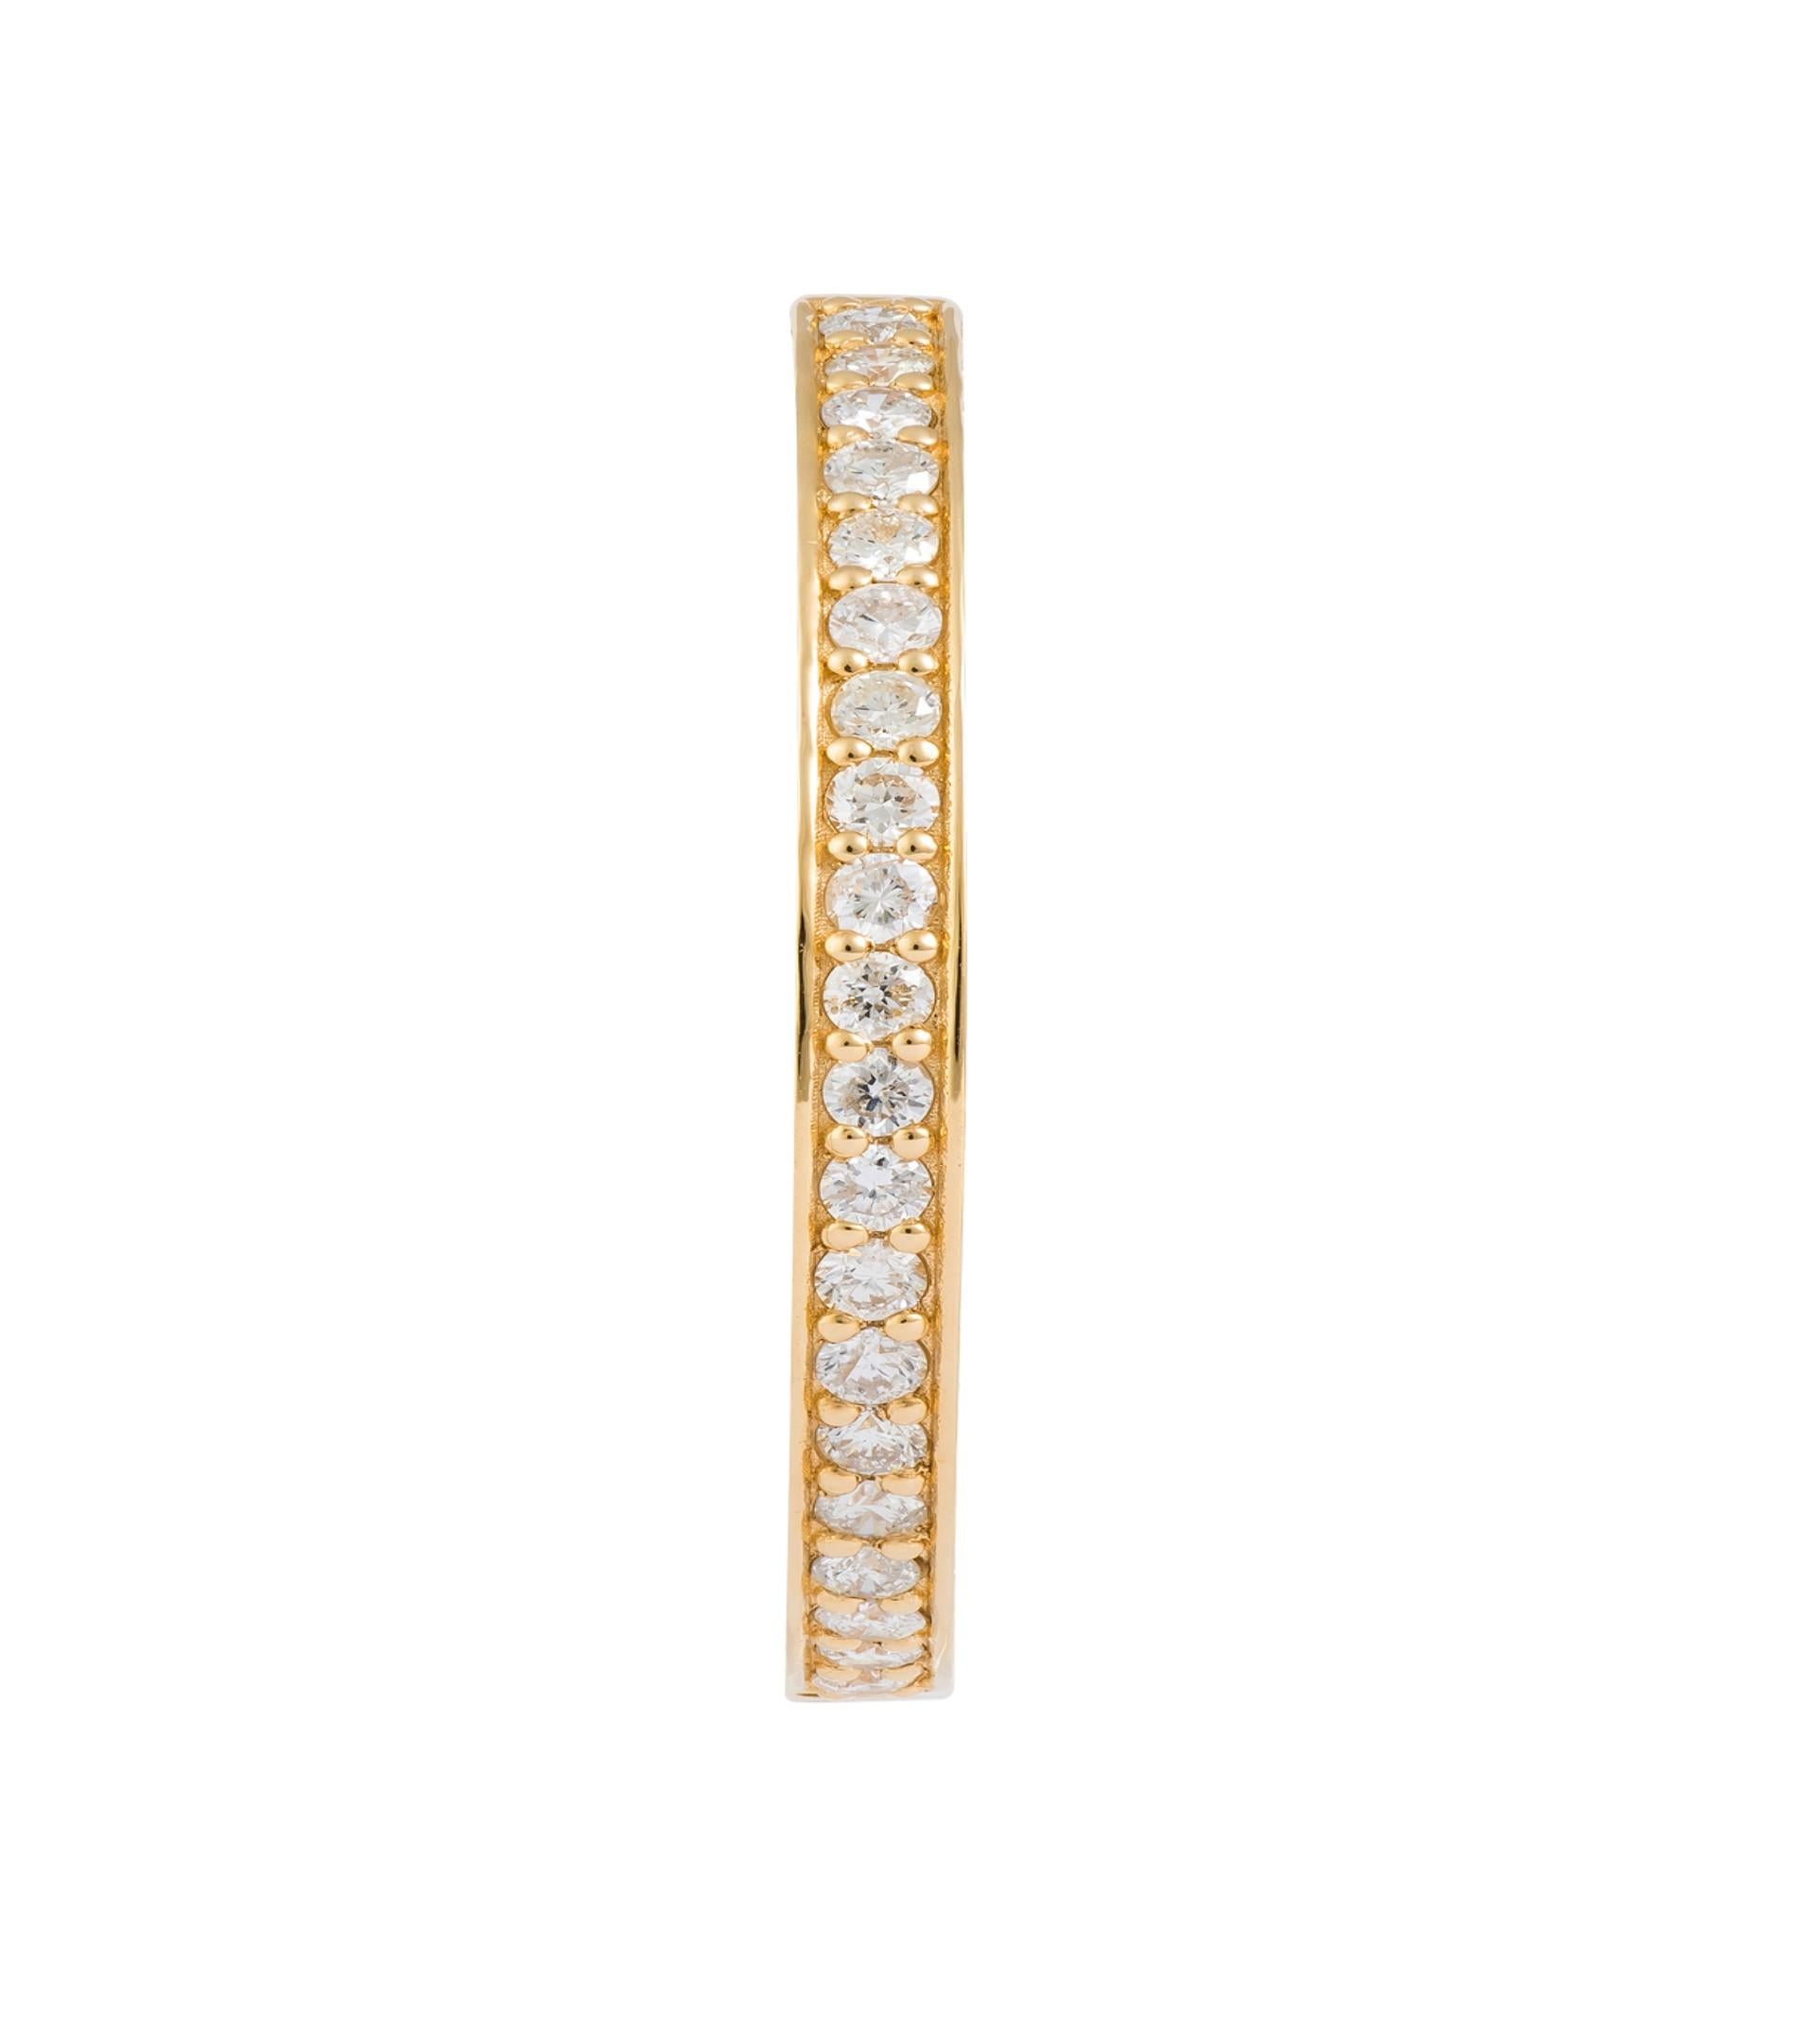 The Following Item we are offering is a Rare Important Radiant 18KT Gold Large Rare Fancy Gorgeous Glittering Fancy Diamond Hoop Earrings. Earrings are comprised of a Gorgeous Array of Fancy Glittering Round Shaped Diamonds!!! T.C.W. approx